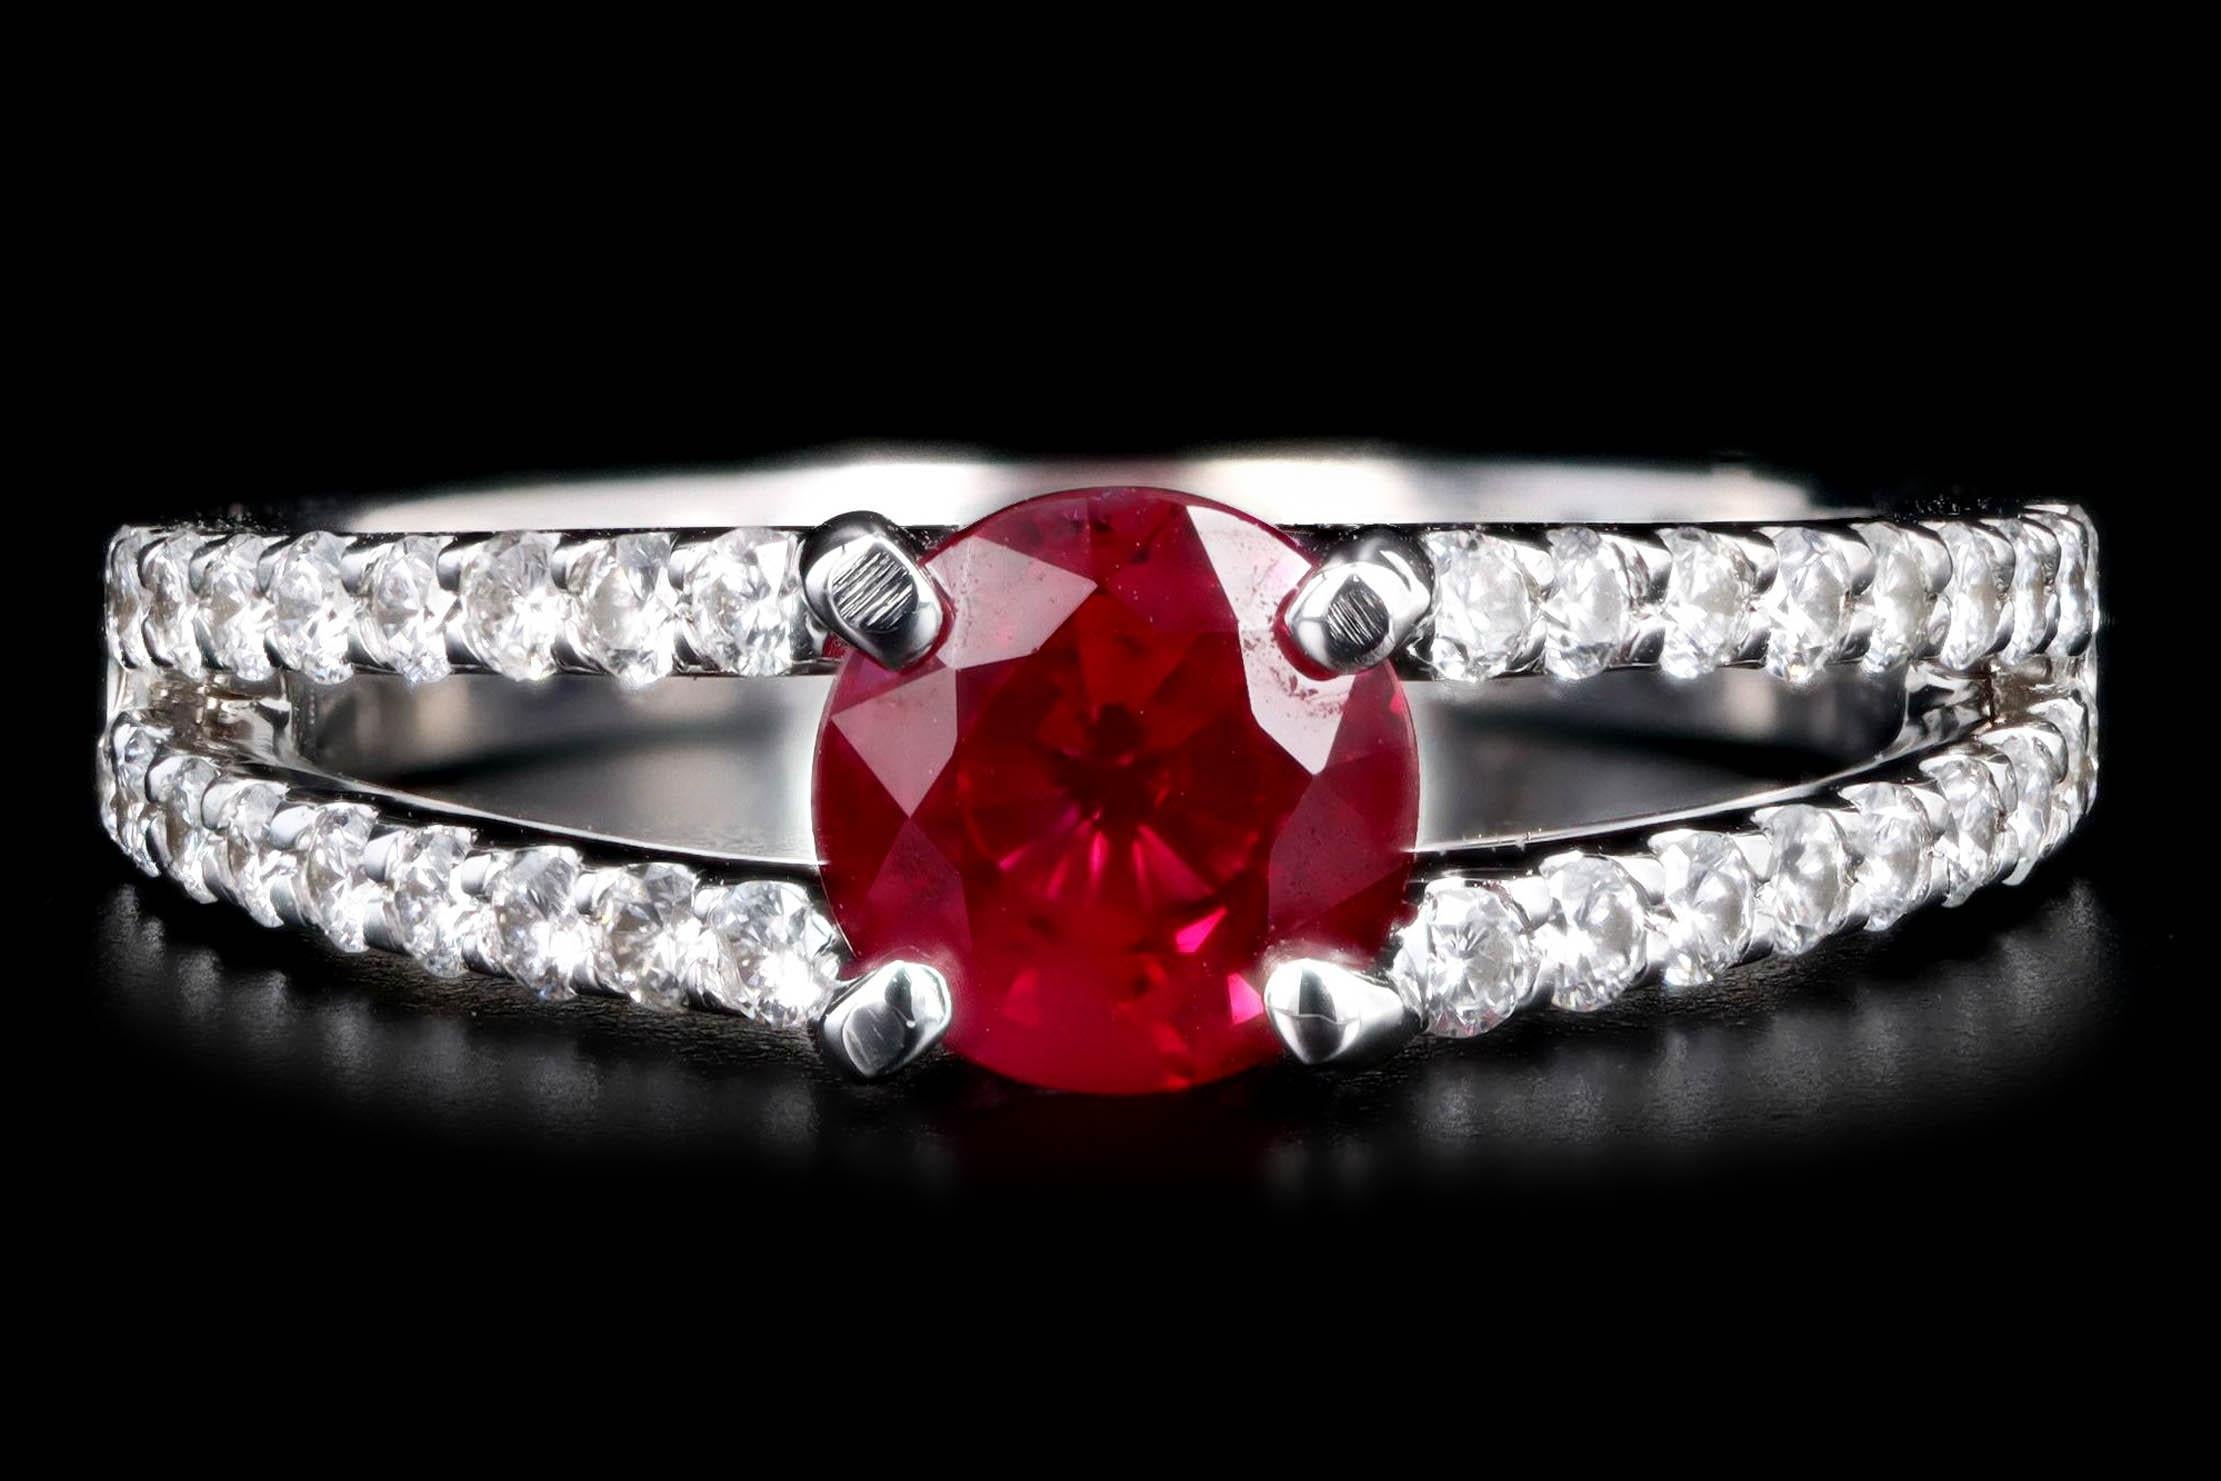 Era: New

Composition: 18K White Gold

Primary Stones: Round ''Pigeon's Blood'' Natural Ruby

Origin: Burma

Carat Weight: 1.22 Carats

GIA Certified: 6227421831

Accent Stone: Thirty Six Round Brilliant Cut Diamonds

Carat Weight: Approximately